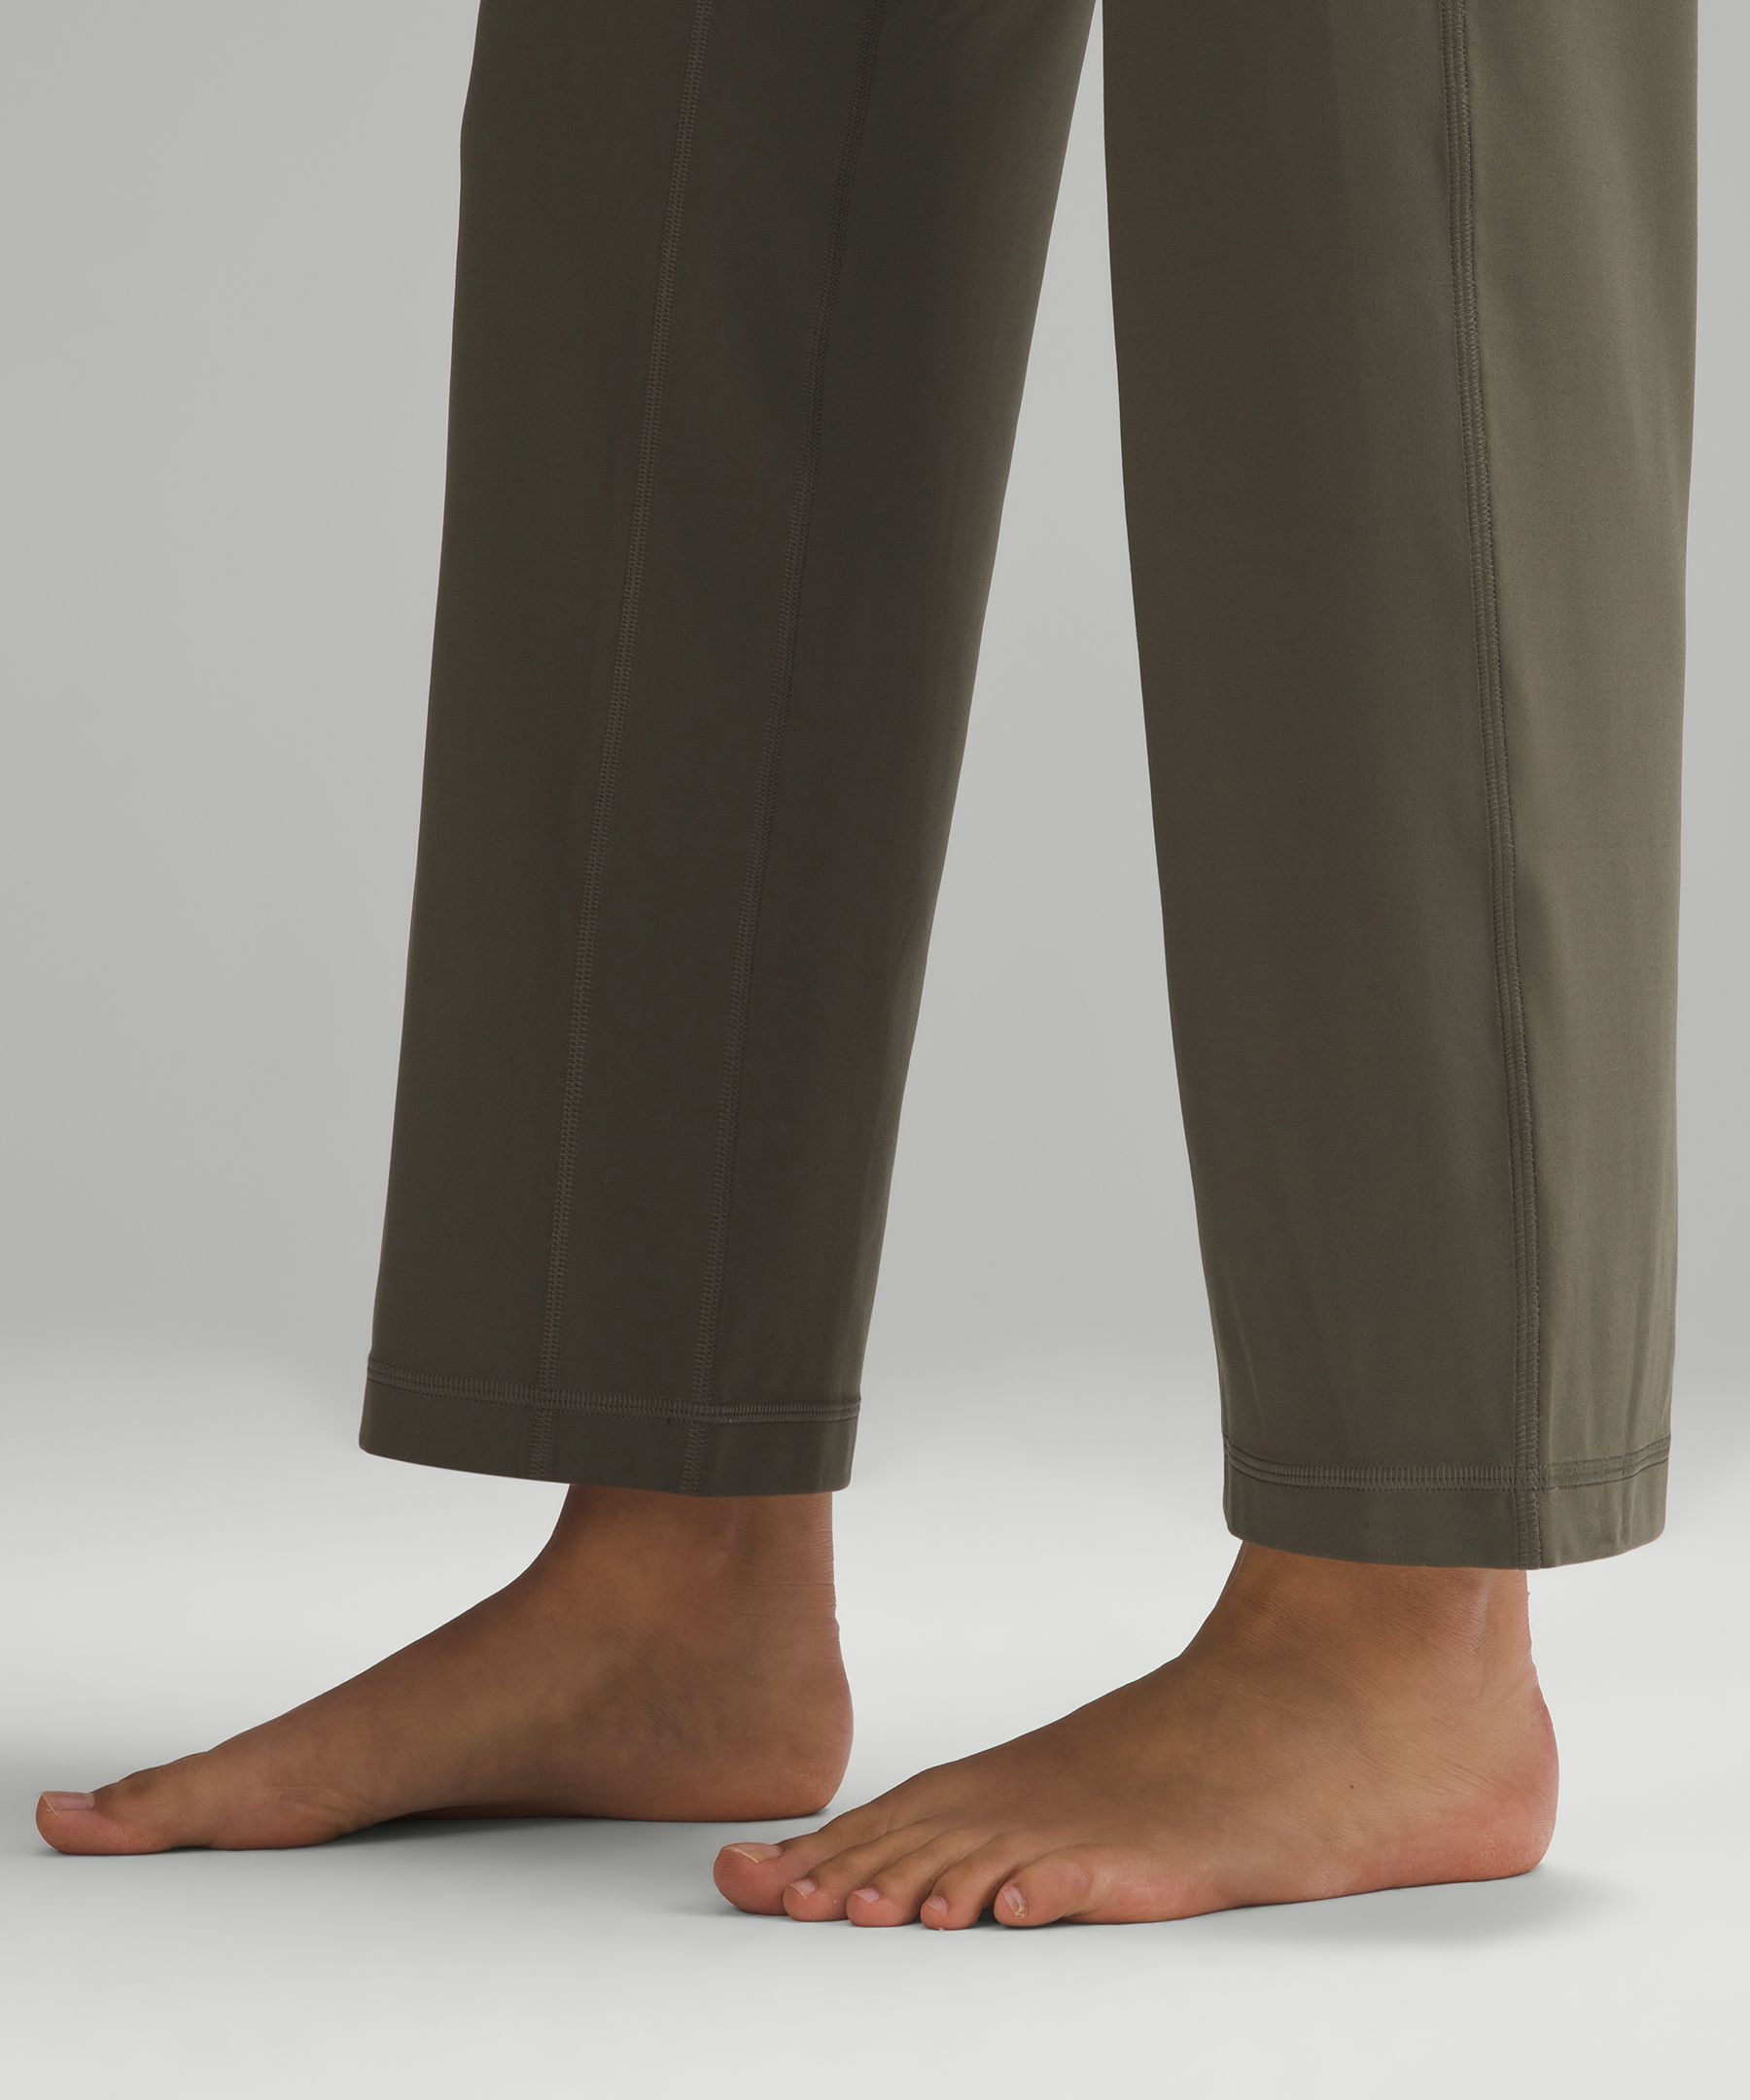 lululemon Align™ High-Rise Wide-Leg Pant 28 *Asia Fit, Carob Brown